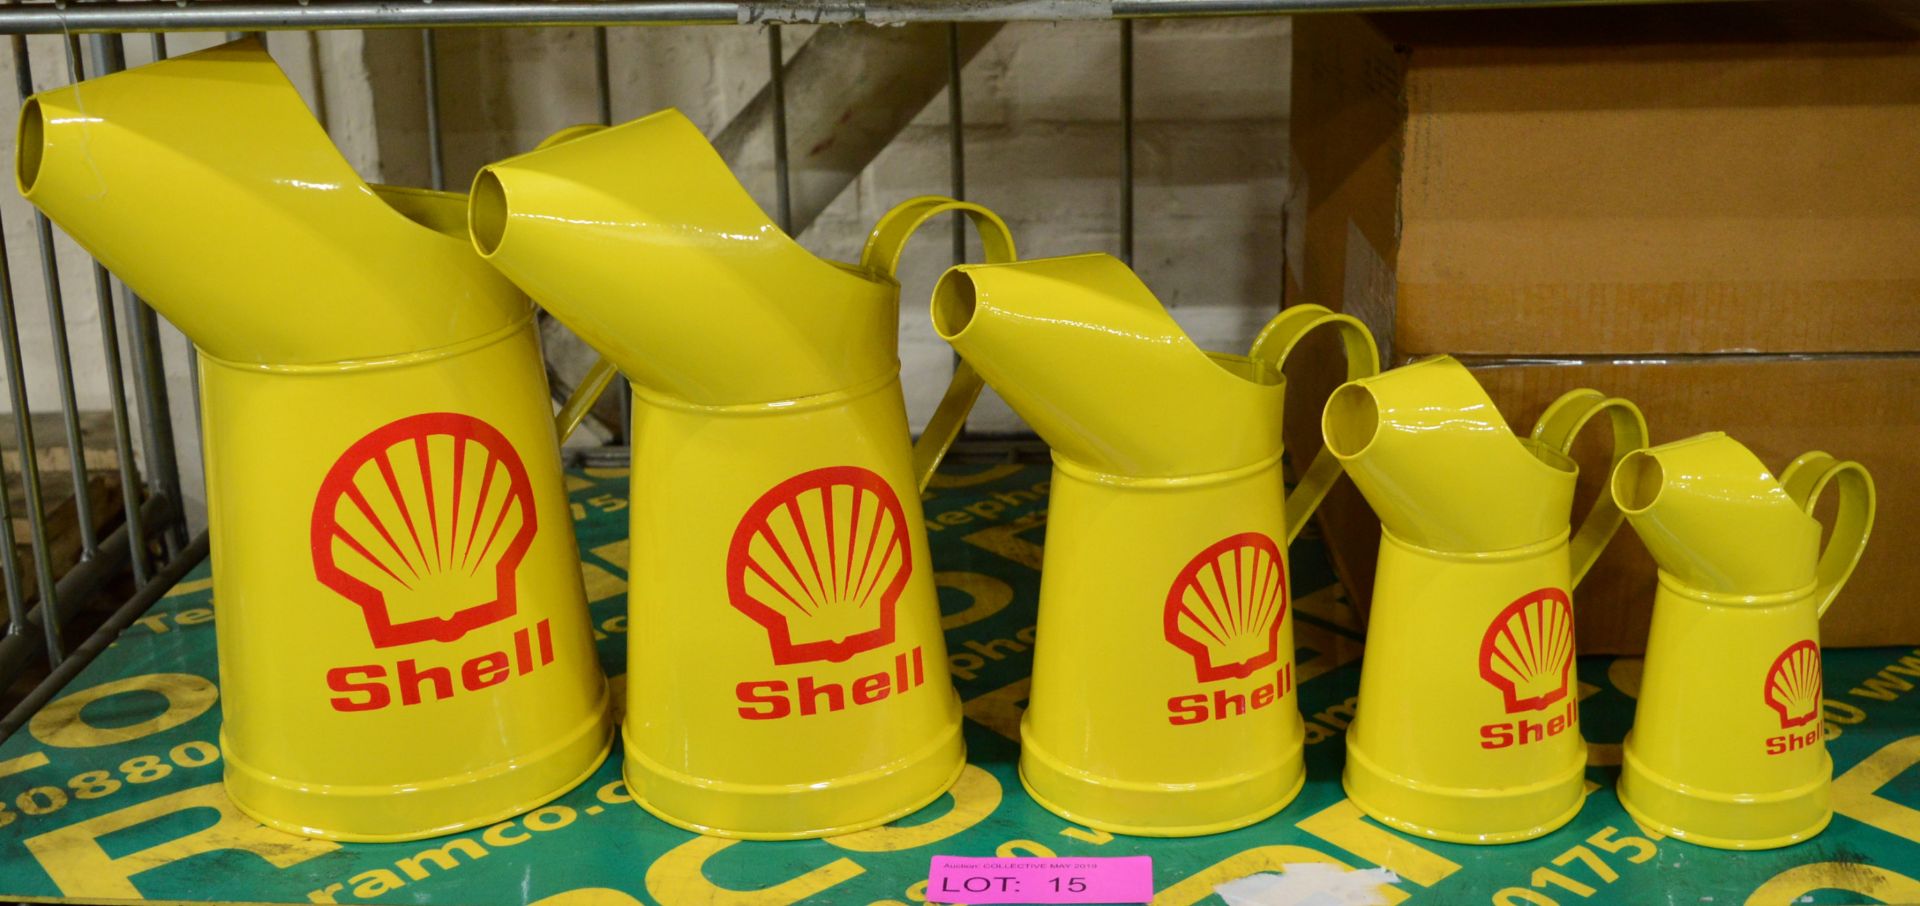 Set 5x of decorative Shell Oil Cans.